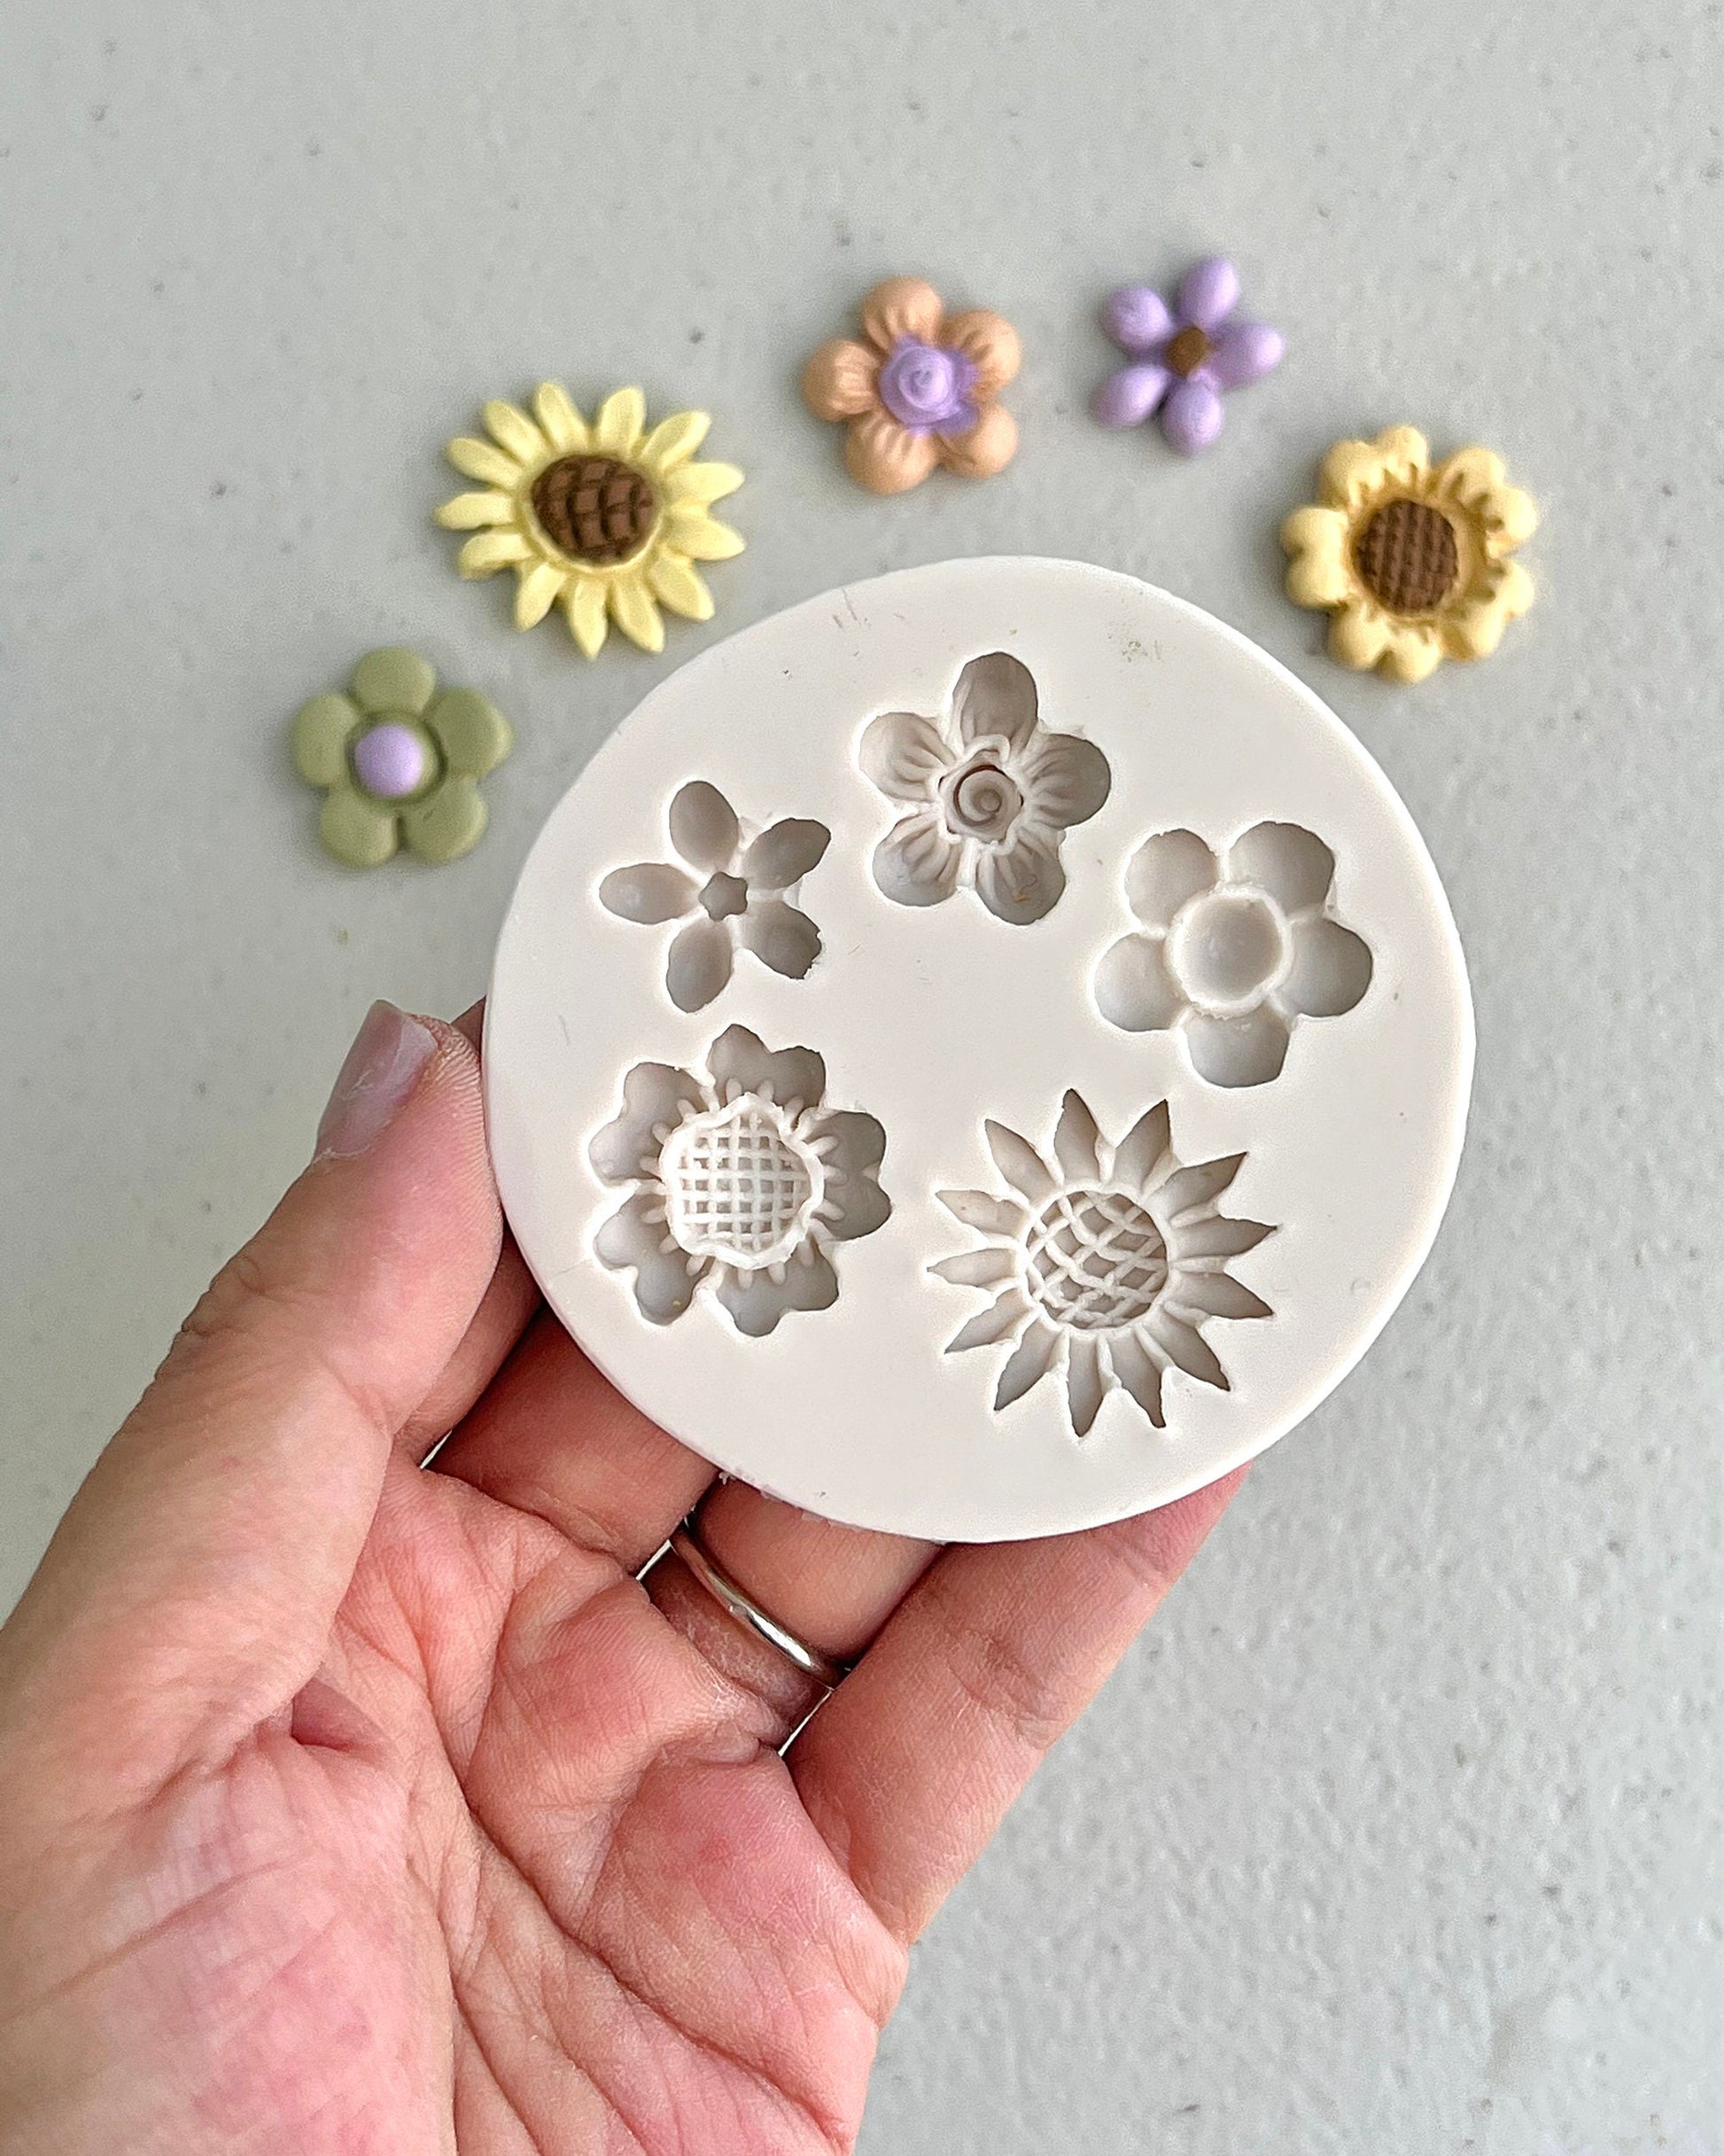 Small Flower Rubber Mould